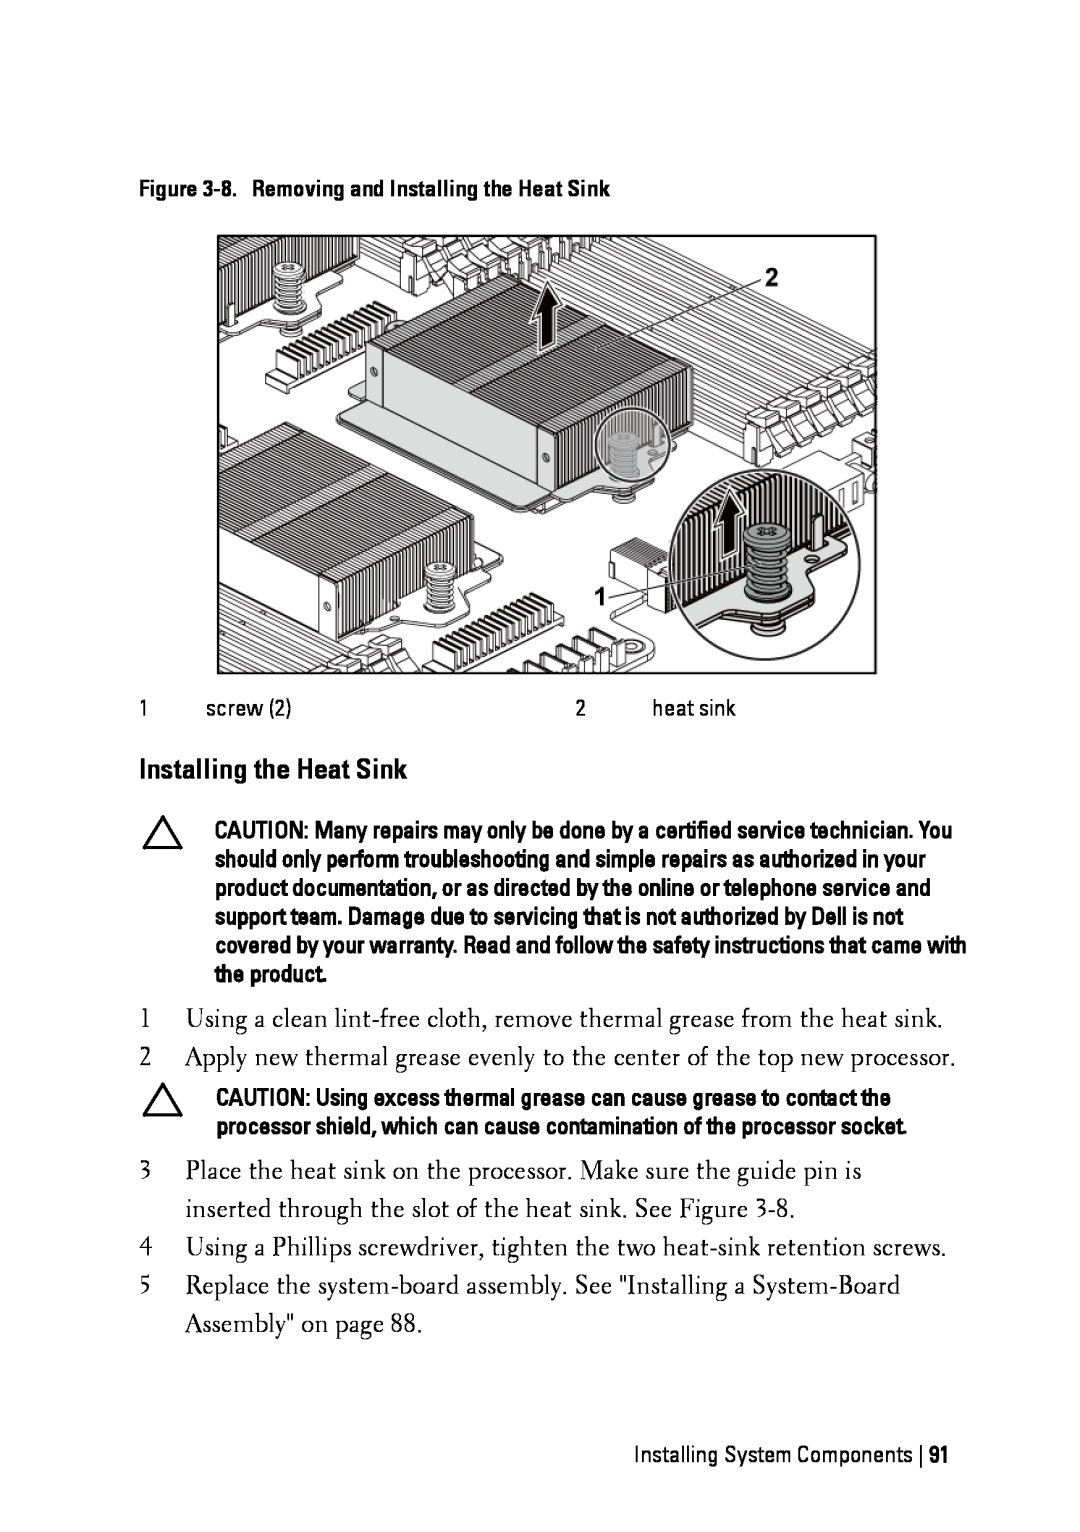 Dell C6145 manual 8. Removing and Installing the Heat Sink 